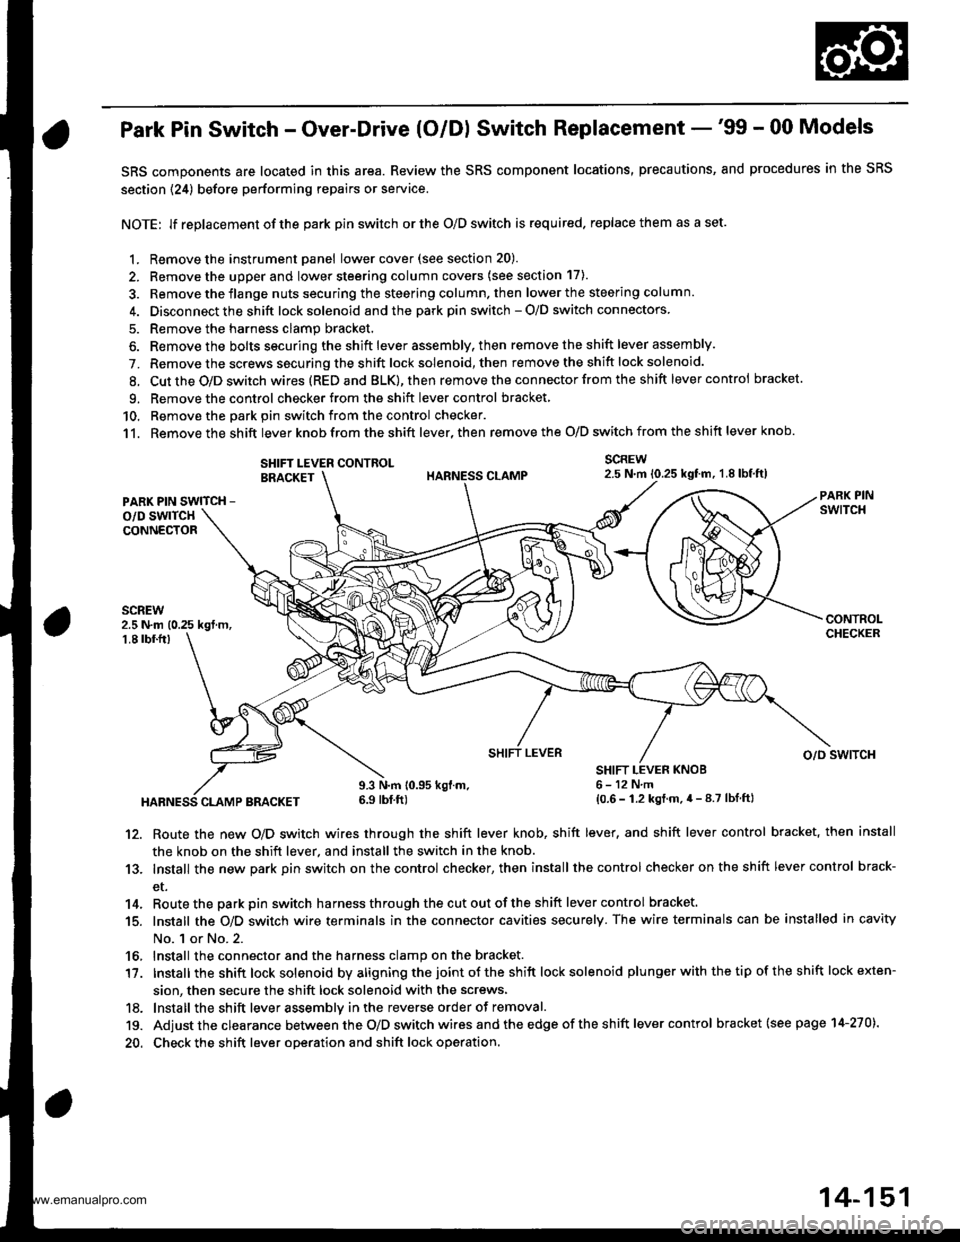 HONDA CR-V 1998 RD1-RD3 / 1.G Workshop Manual 
Park Pin Switch - Over-Drive (O/Dl Switch Replacement -99 - 00 Models
SRS components are located in this area. Review the SRS component locations, precautions, and procedures in the SRS
section {24)